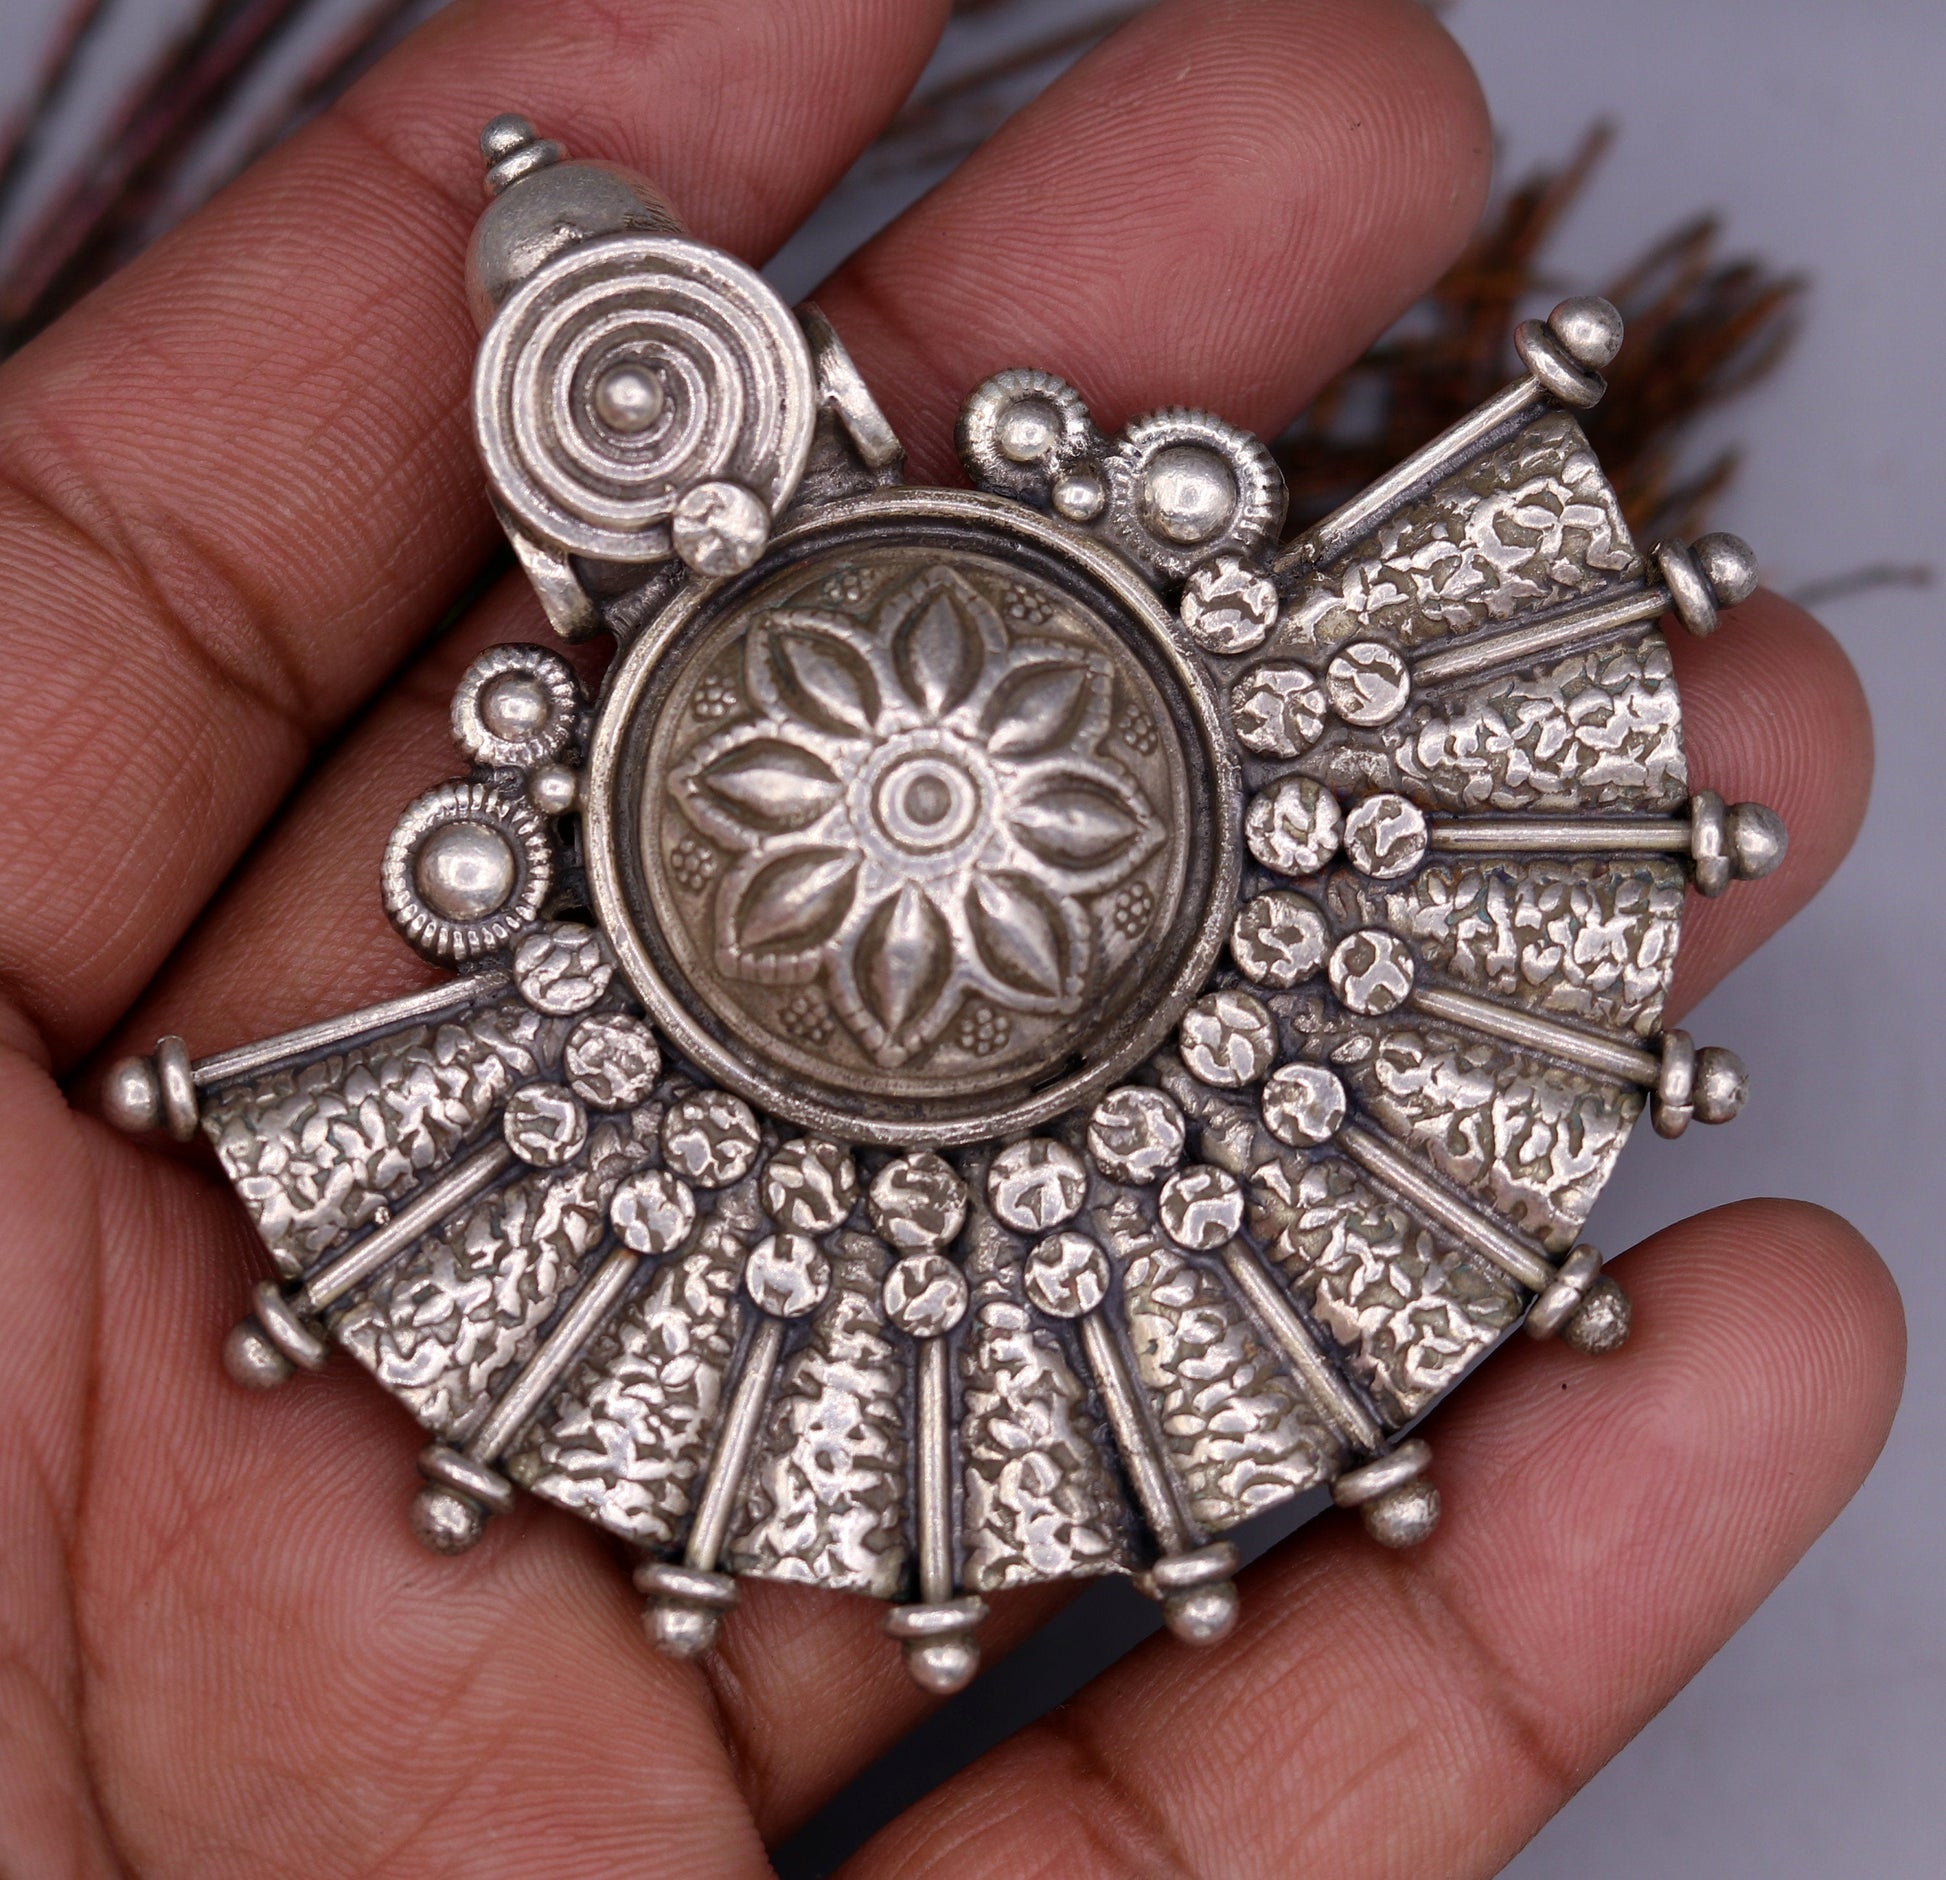 925 sterling silver handmade vintage flower design pendant, unique handcrafted work pendant tribal jewelry pretty gifting jewelry nsp264 - TRIBAL ORNAMENTS